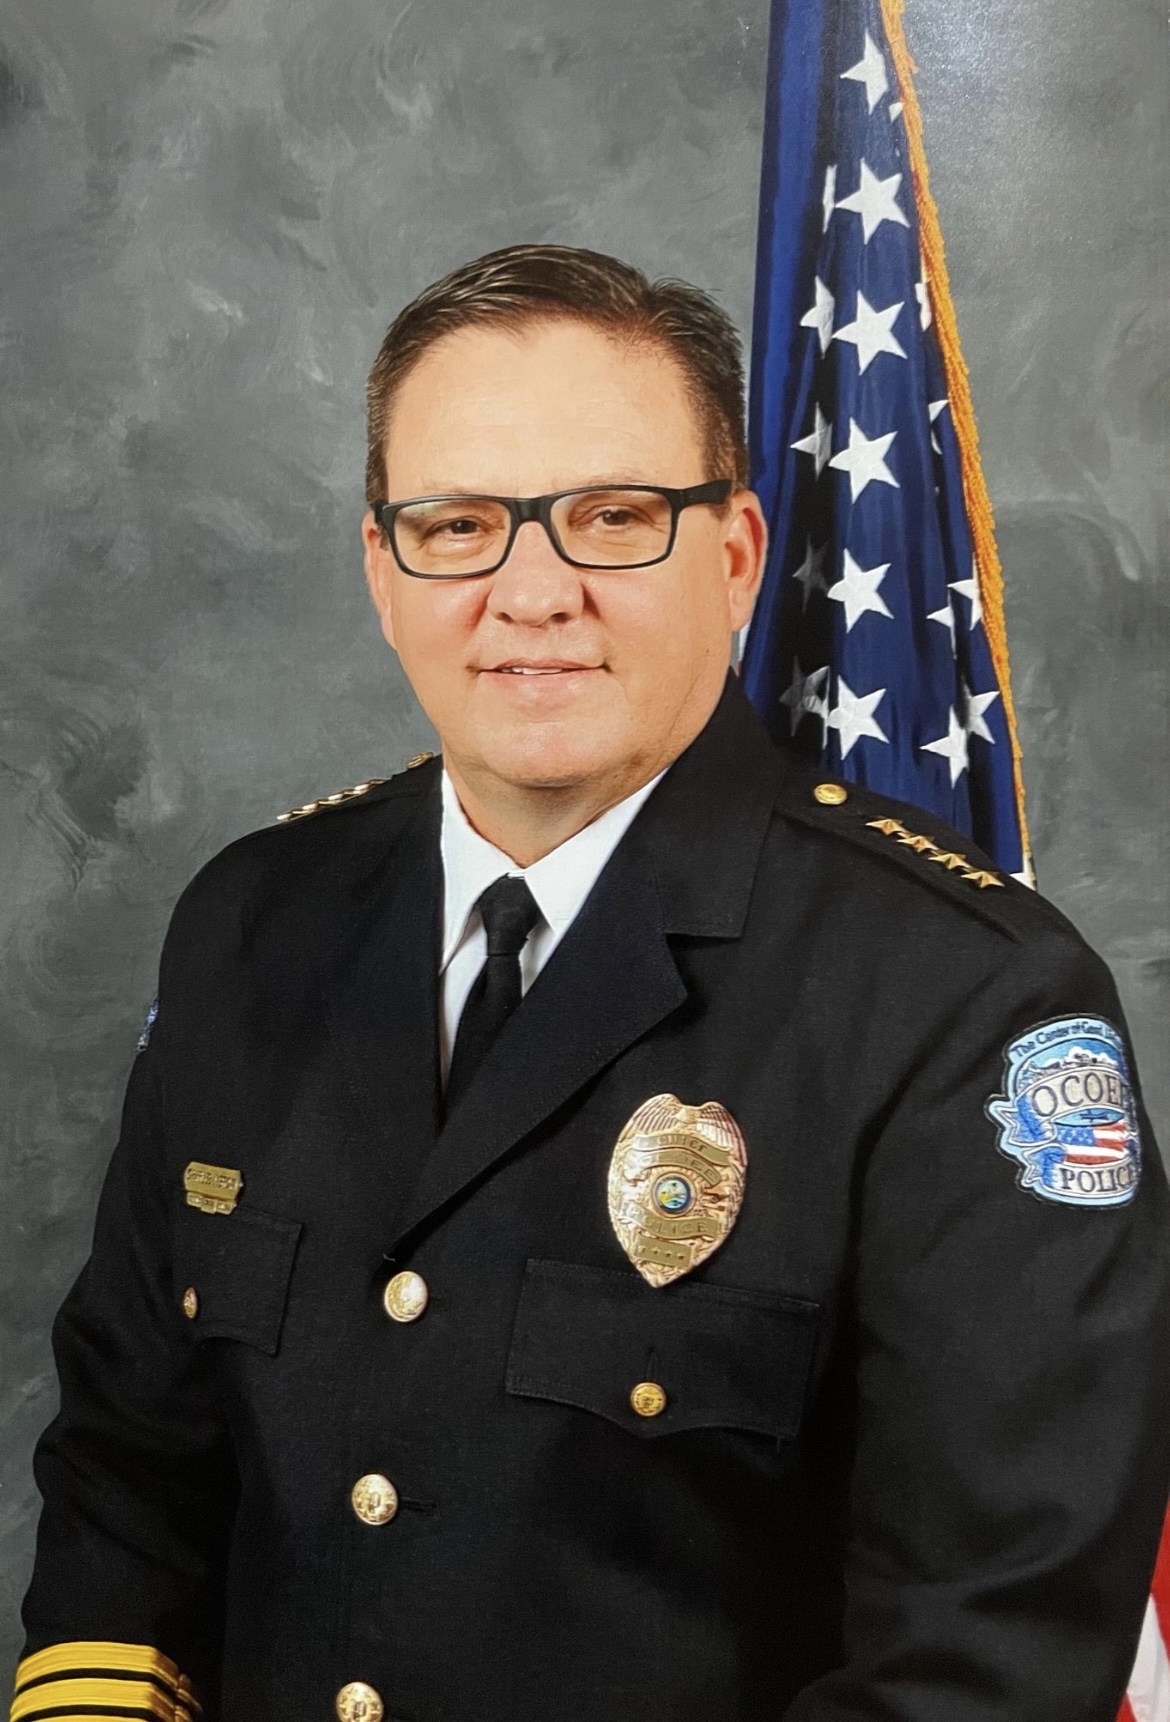 Former Police Chief Charles Brown served at the helm of the department for 12 years. (Courtesy Ocoee Police Department)